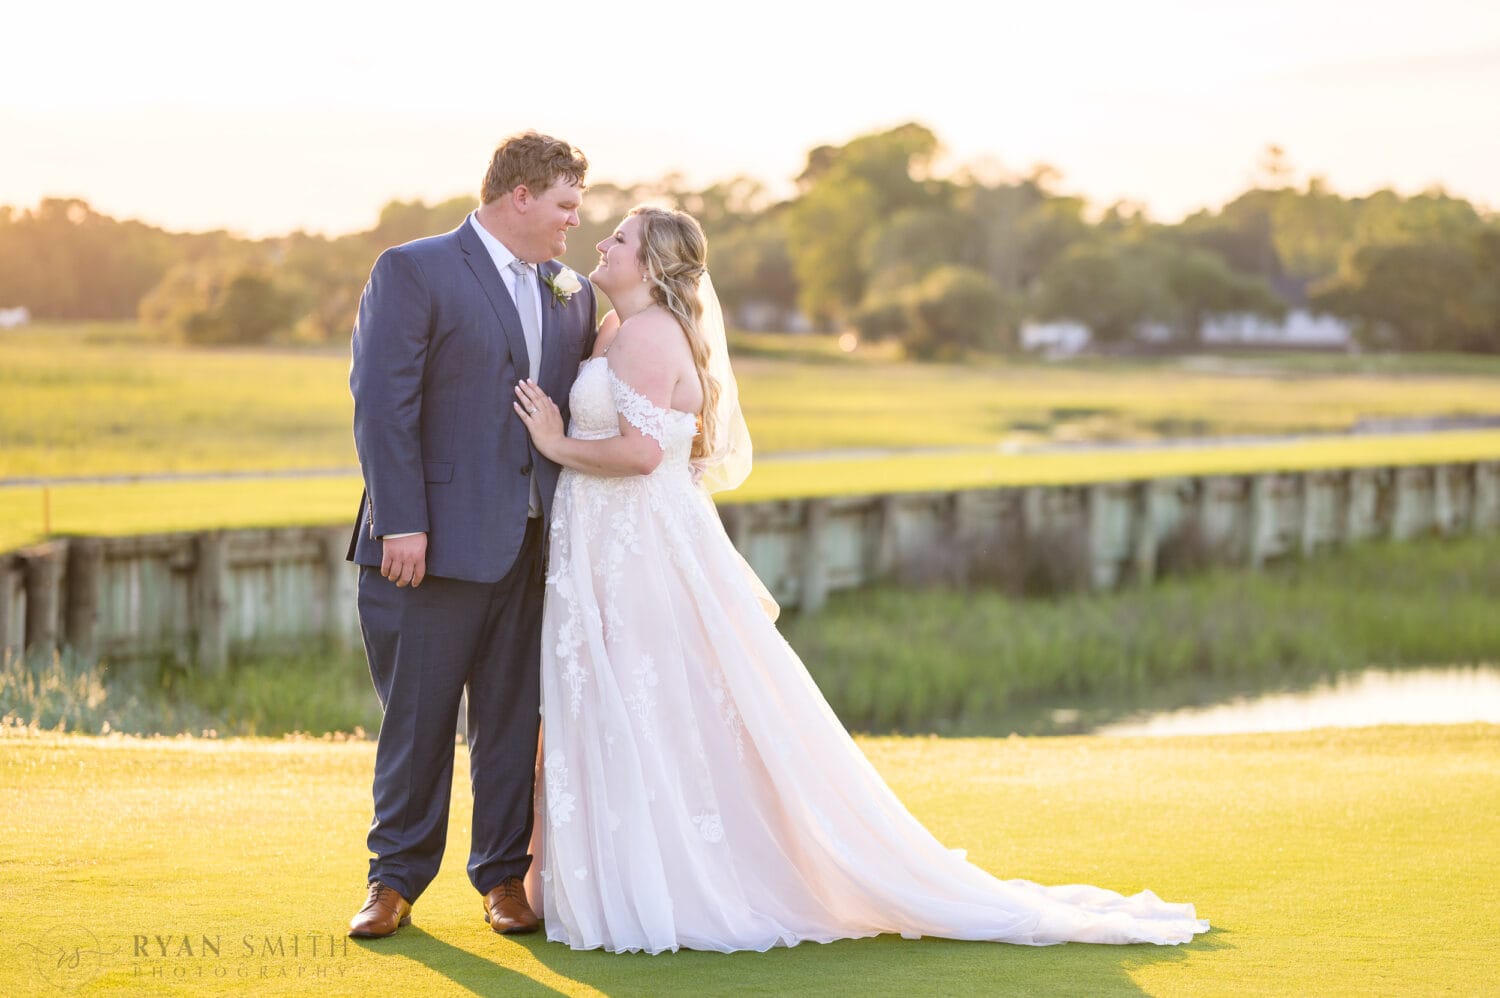 Big smiles with the bride and groom - Pawleys Plantation